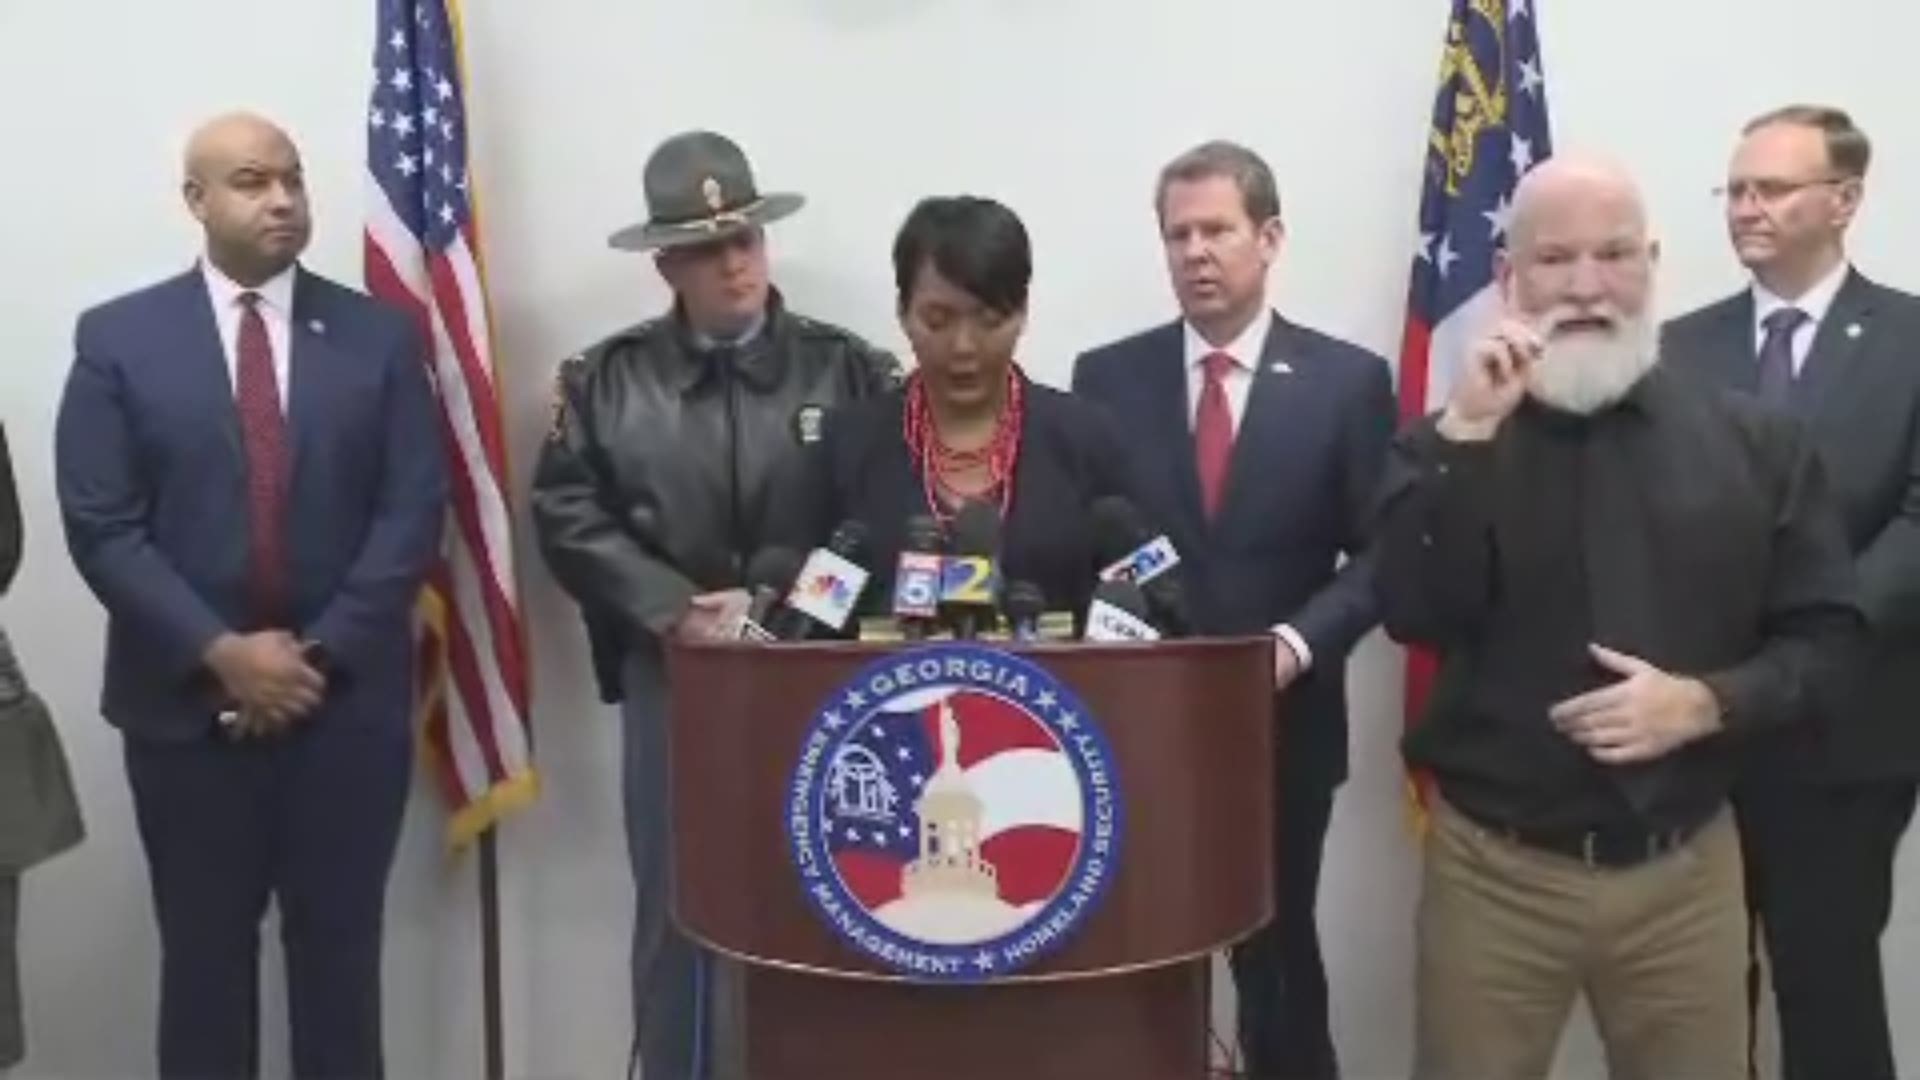 In a joint news conference Monday morning, Georgia Gov. Brian Kemp and Atlanta Mayor Keisha Lance Bottoms announced Tuesday closings of city offices as well as state offices in 35 counties directly affected by the pending winter weather.